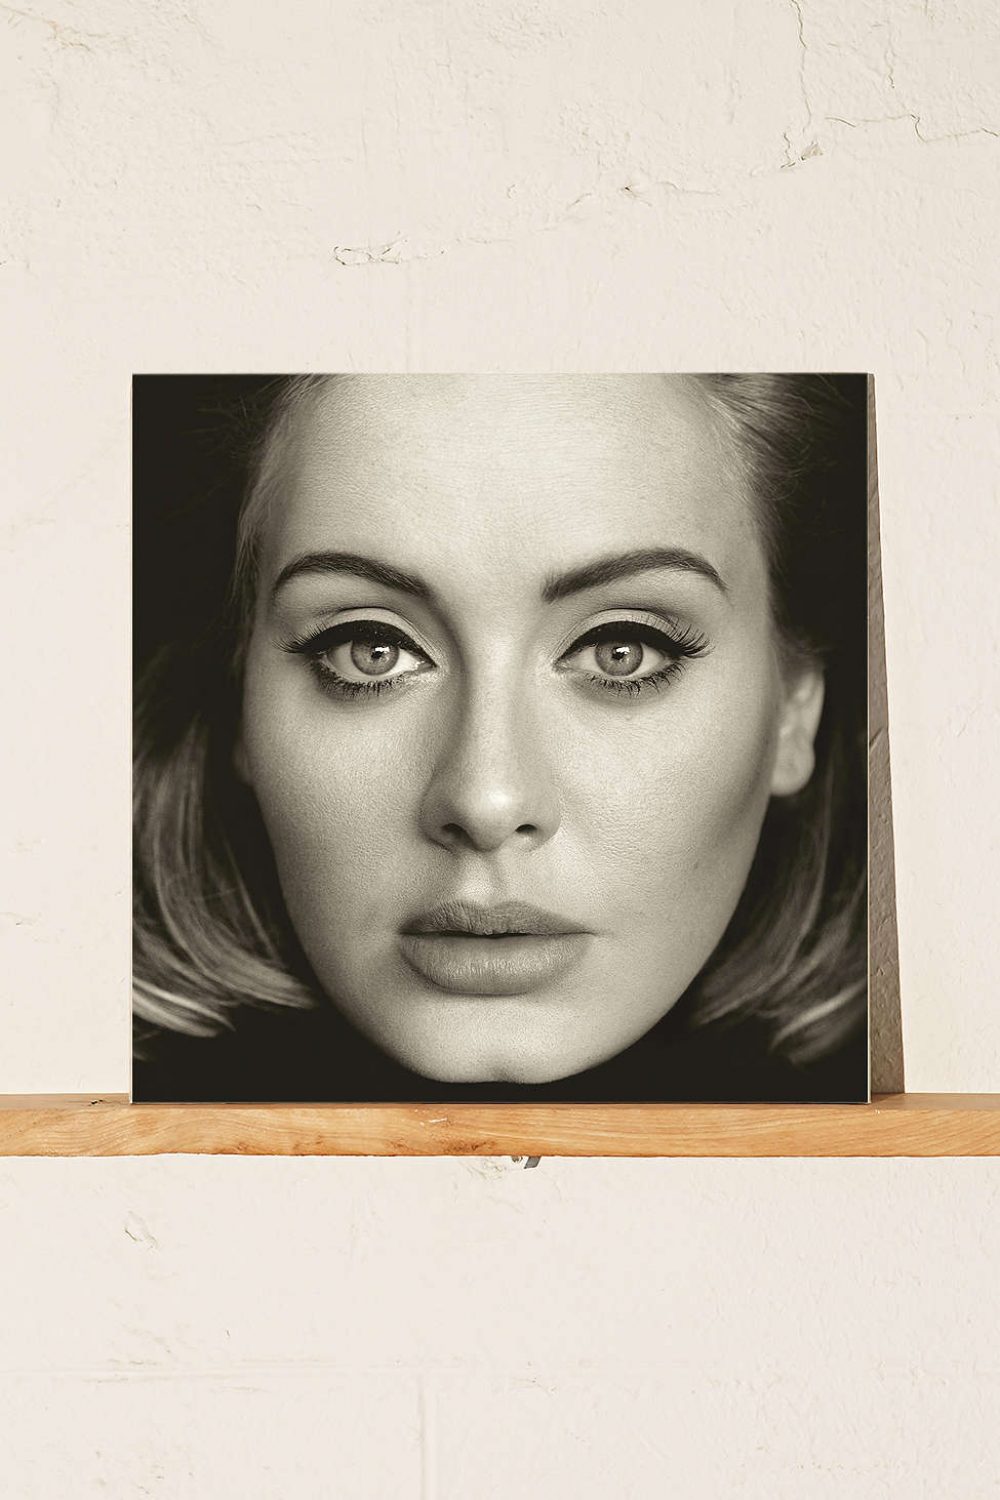 Adele's Album, 25 is available for purchase online. LP Available here.